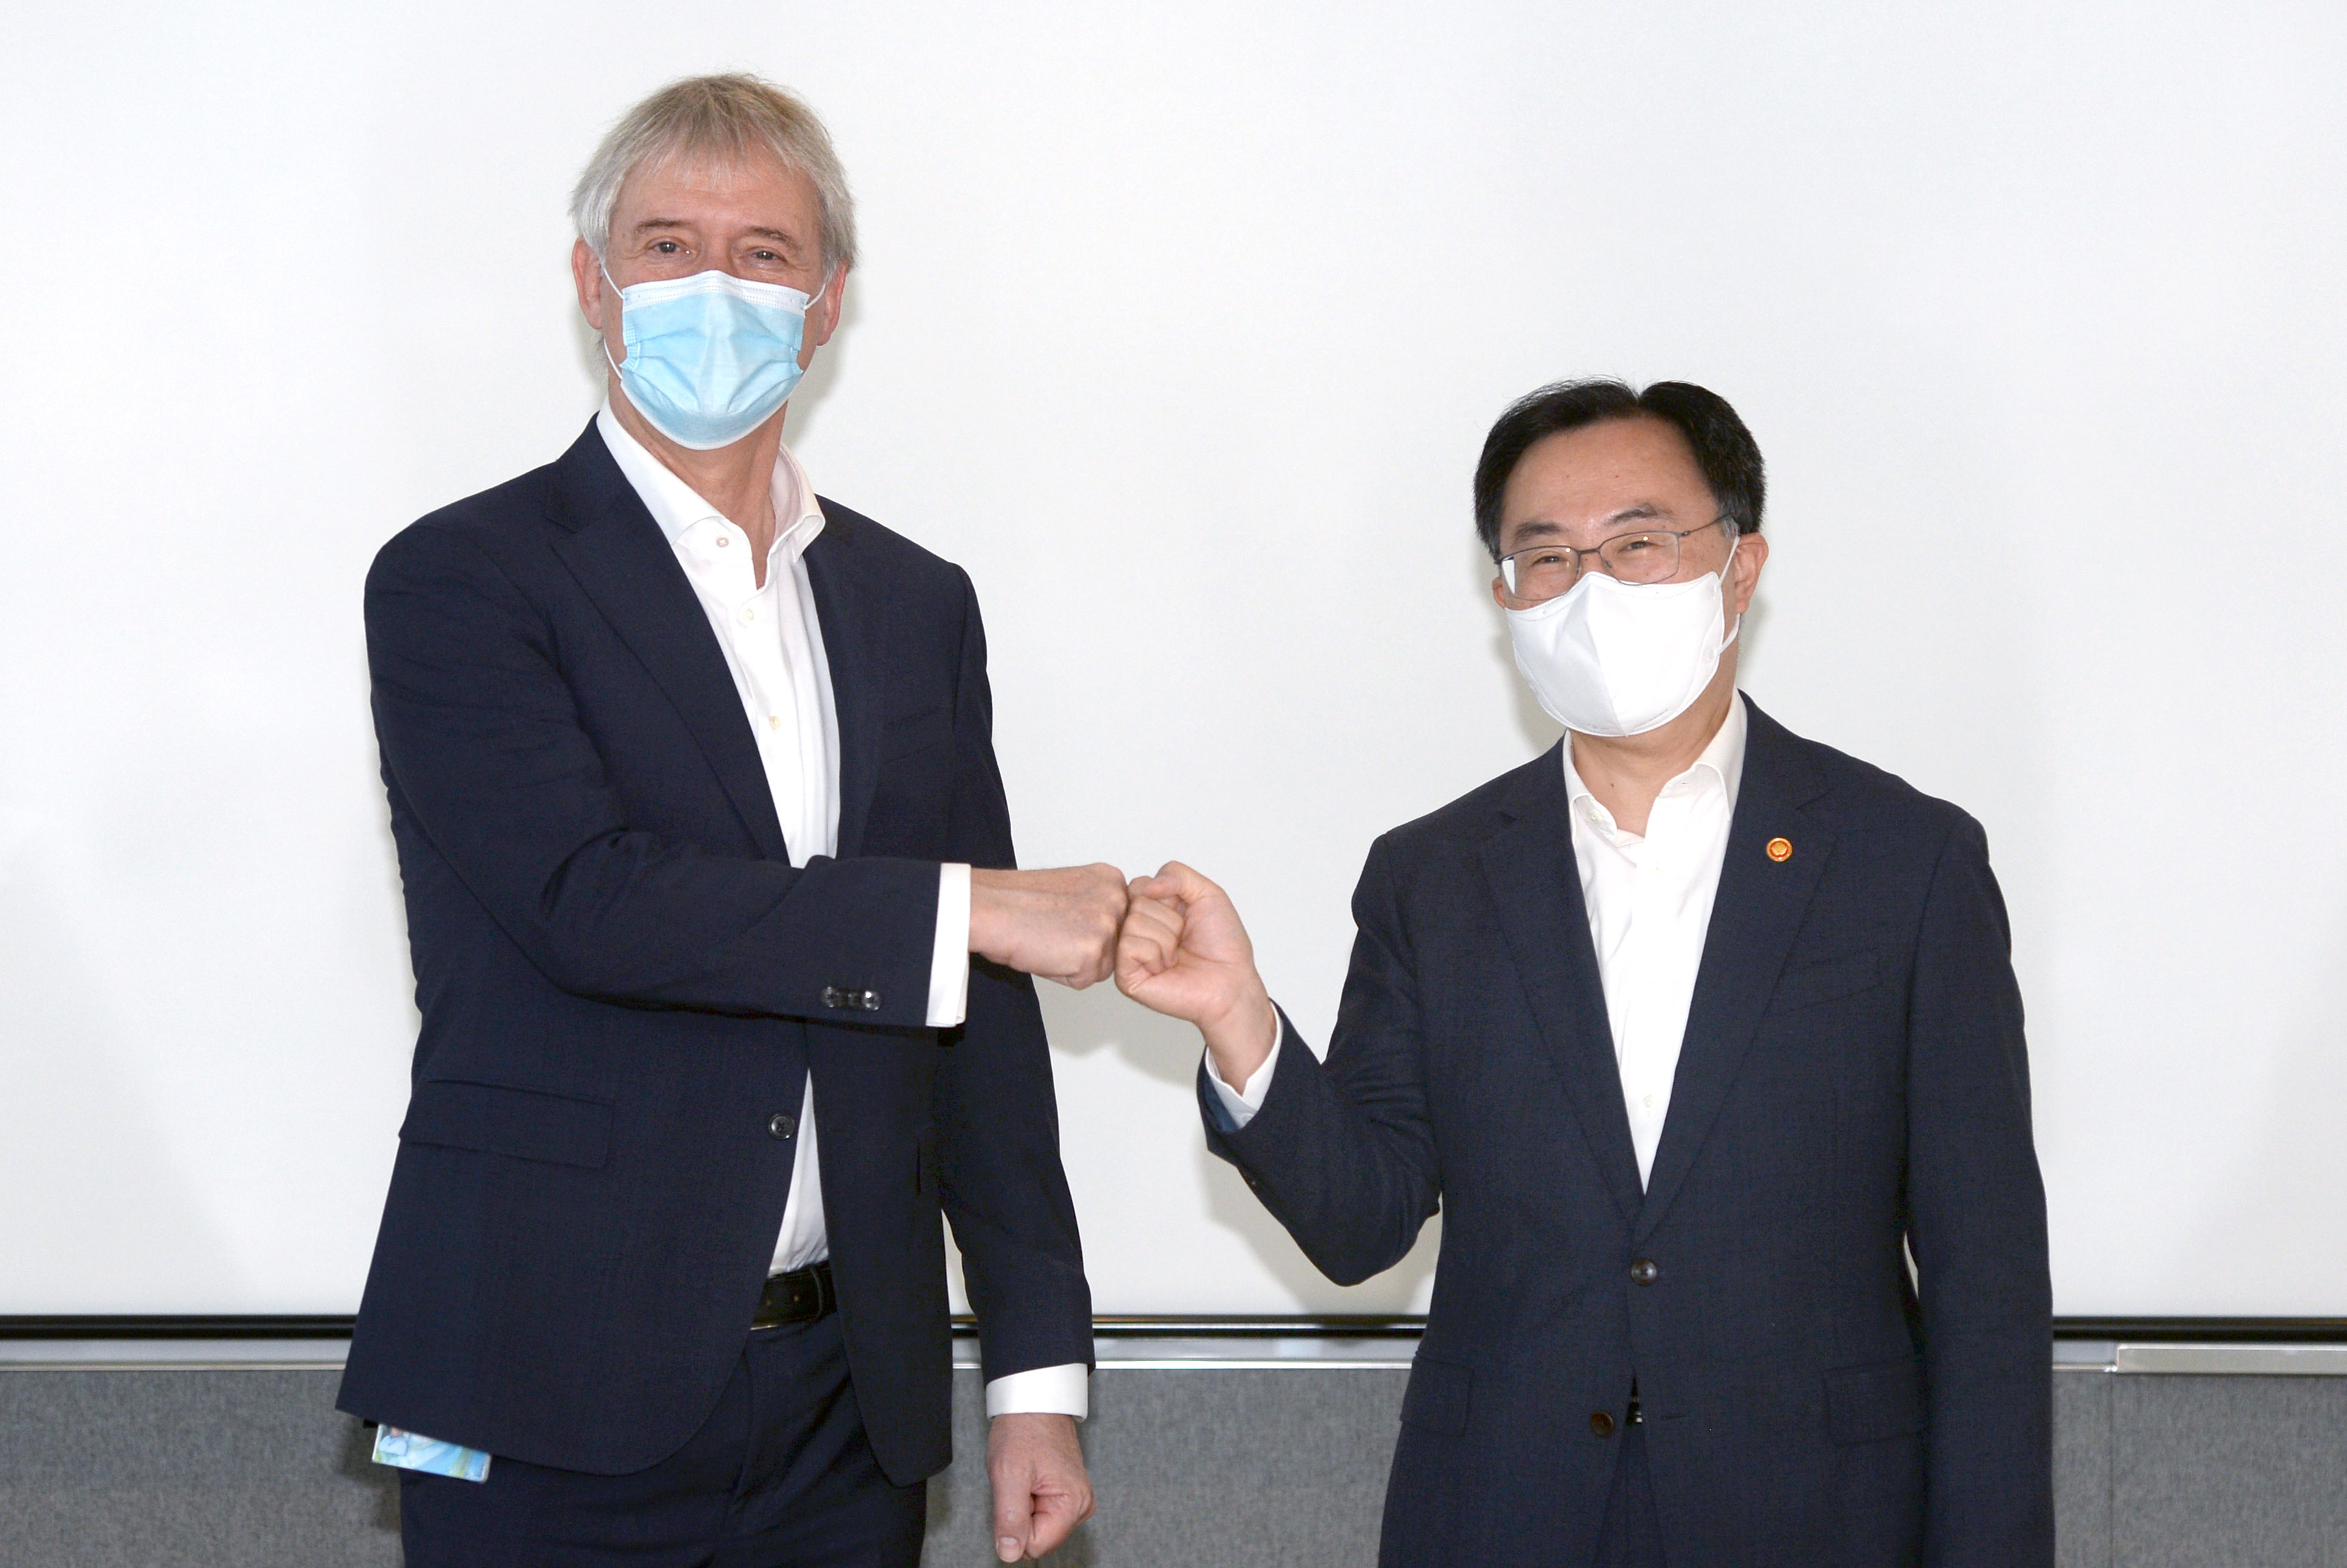 Minister Moon meets ASML CEO Image 0